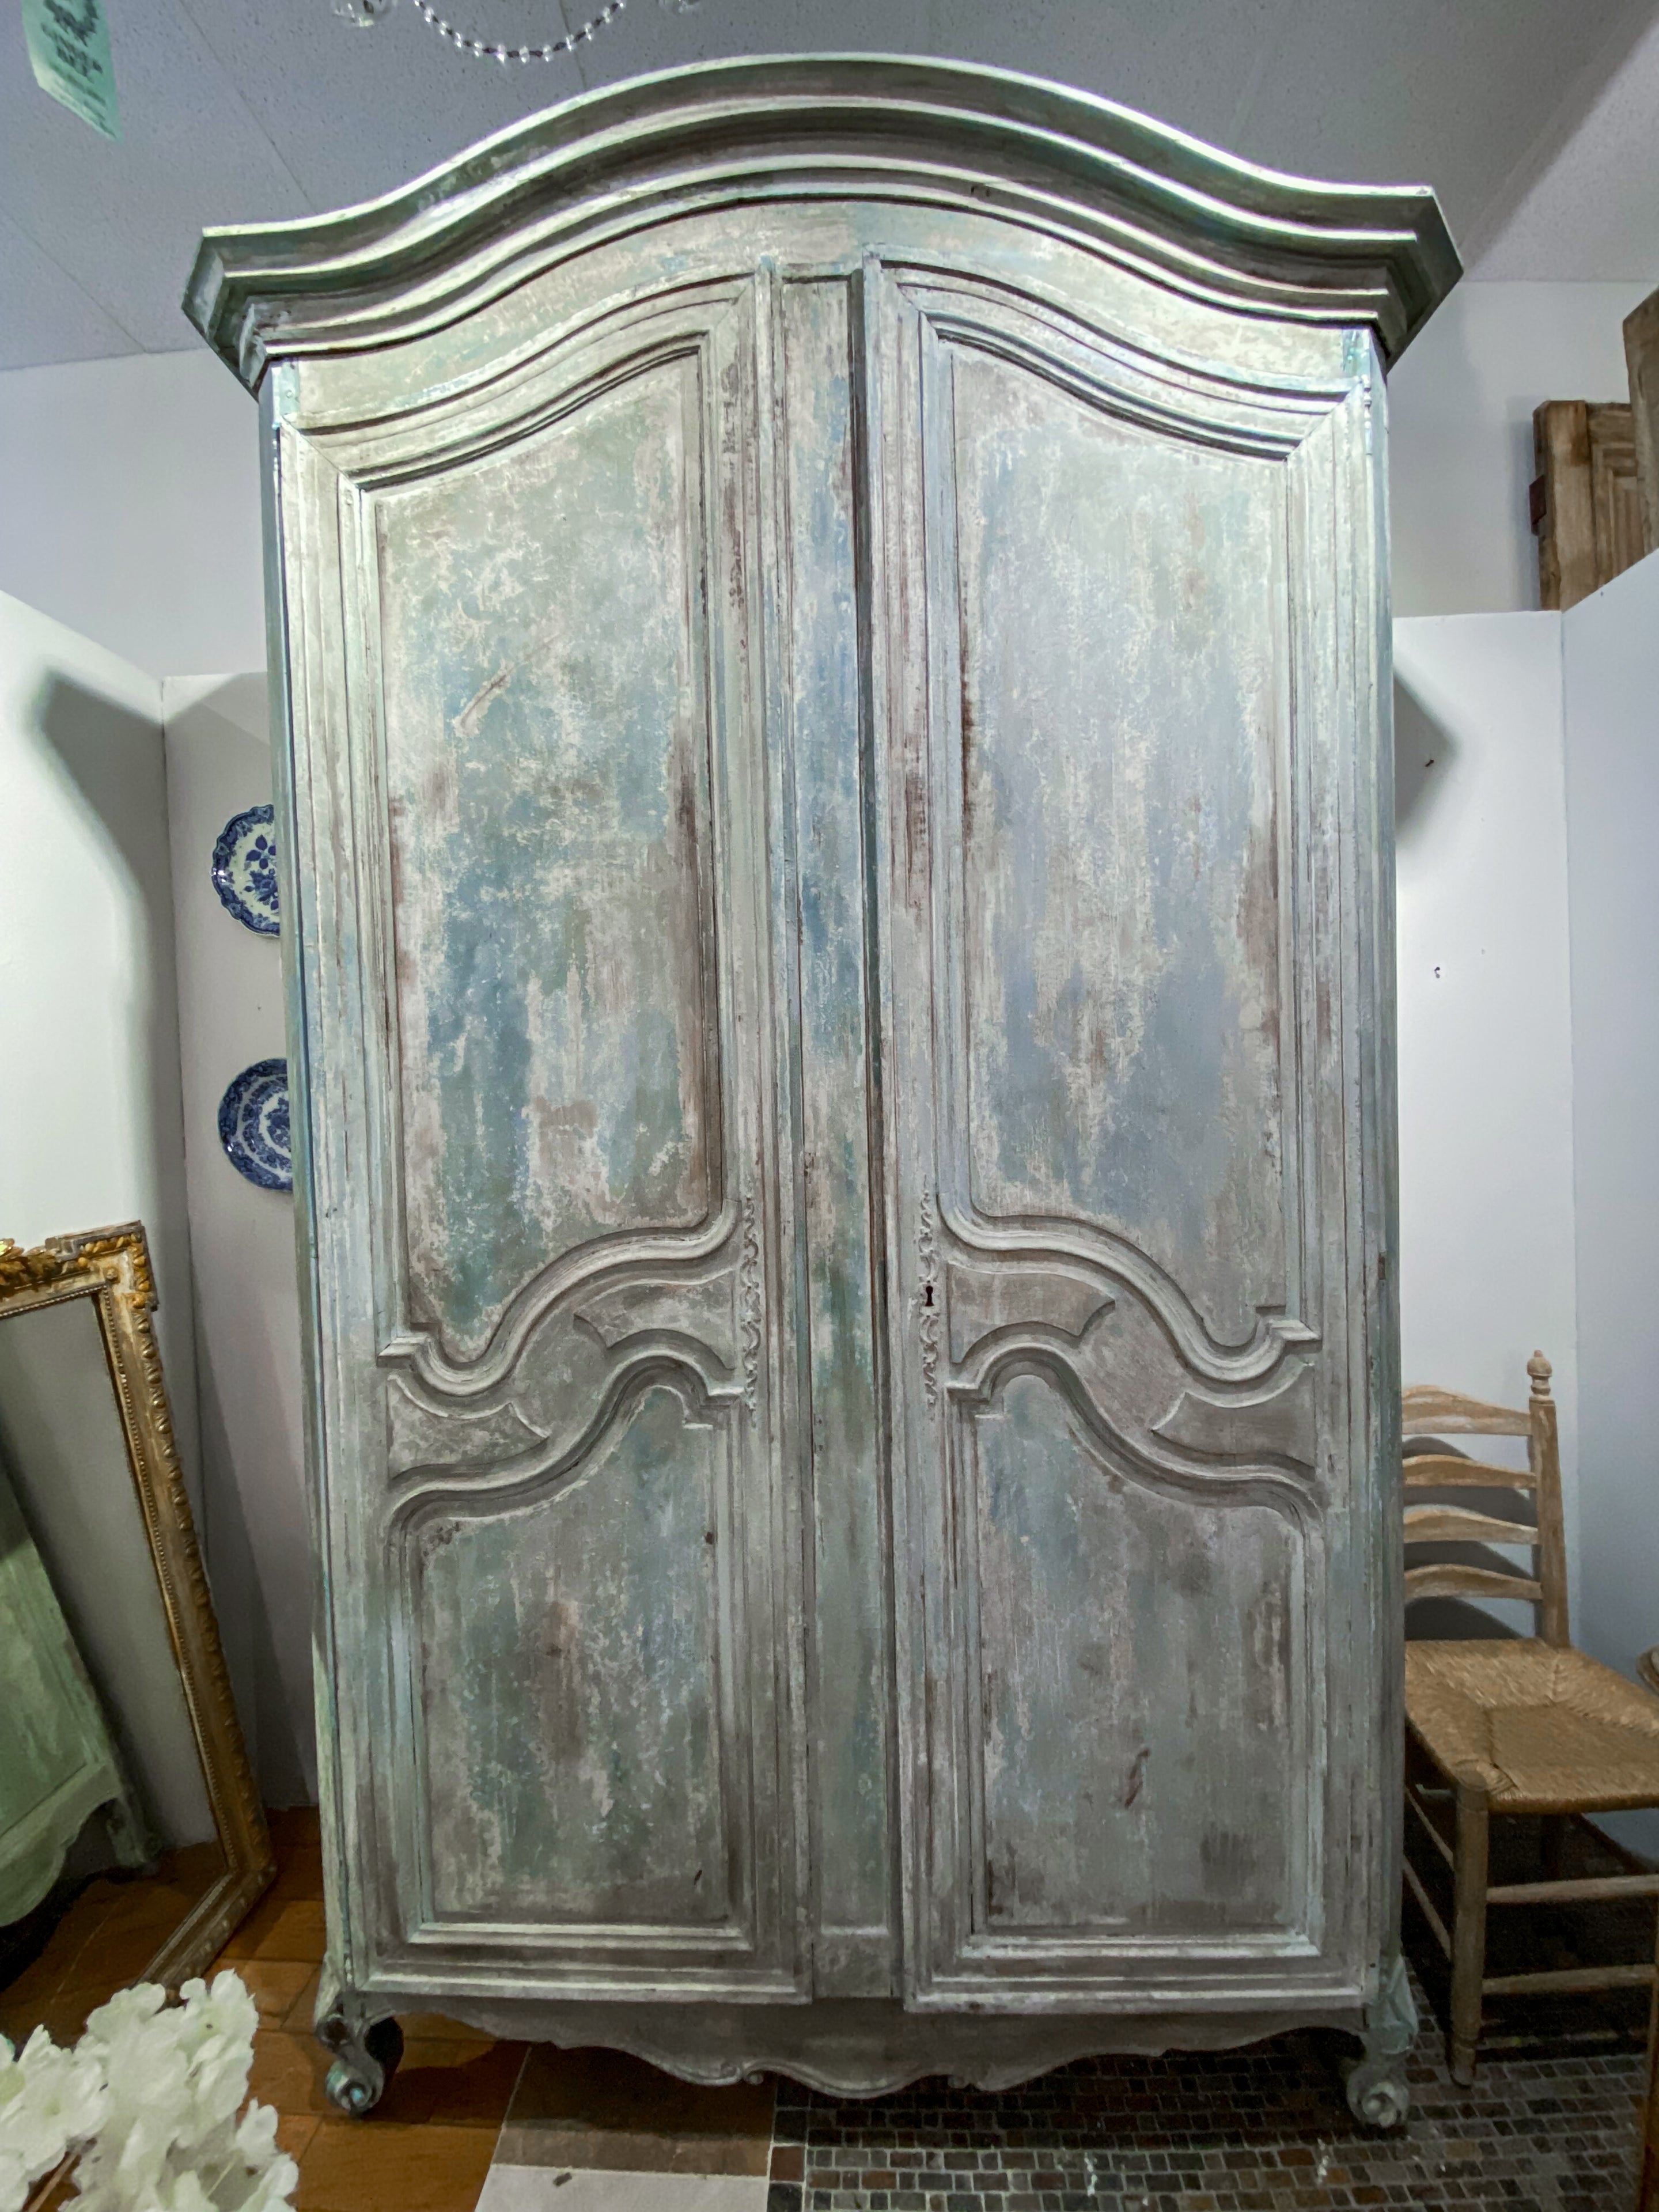 The Impressive Scale 19th Century Louis XV Style Painted Armoire is a remarkable furniture piece that reflects the elegance and sophistication of the Louis XV era. The armoire features shaped paneled doors, adding a touch of artistic flair to its